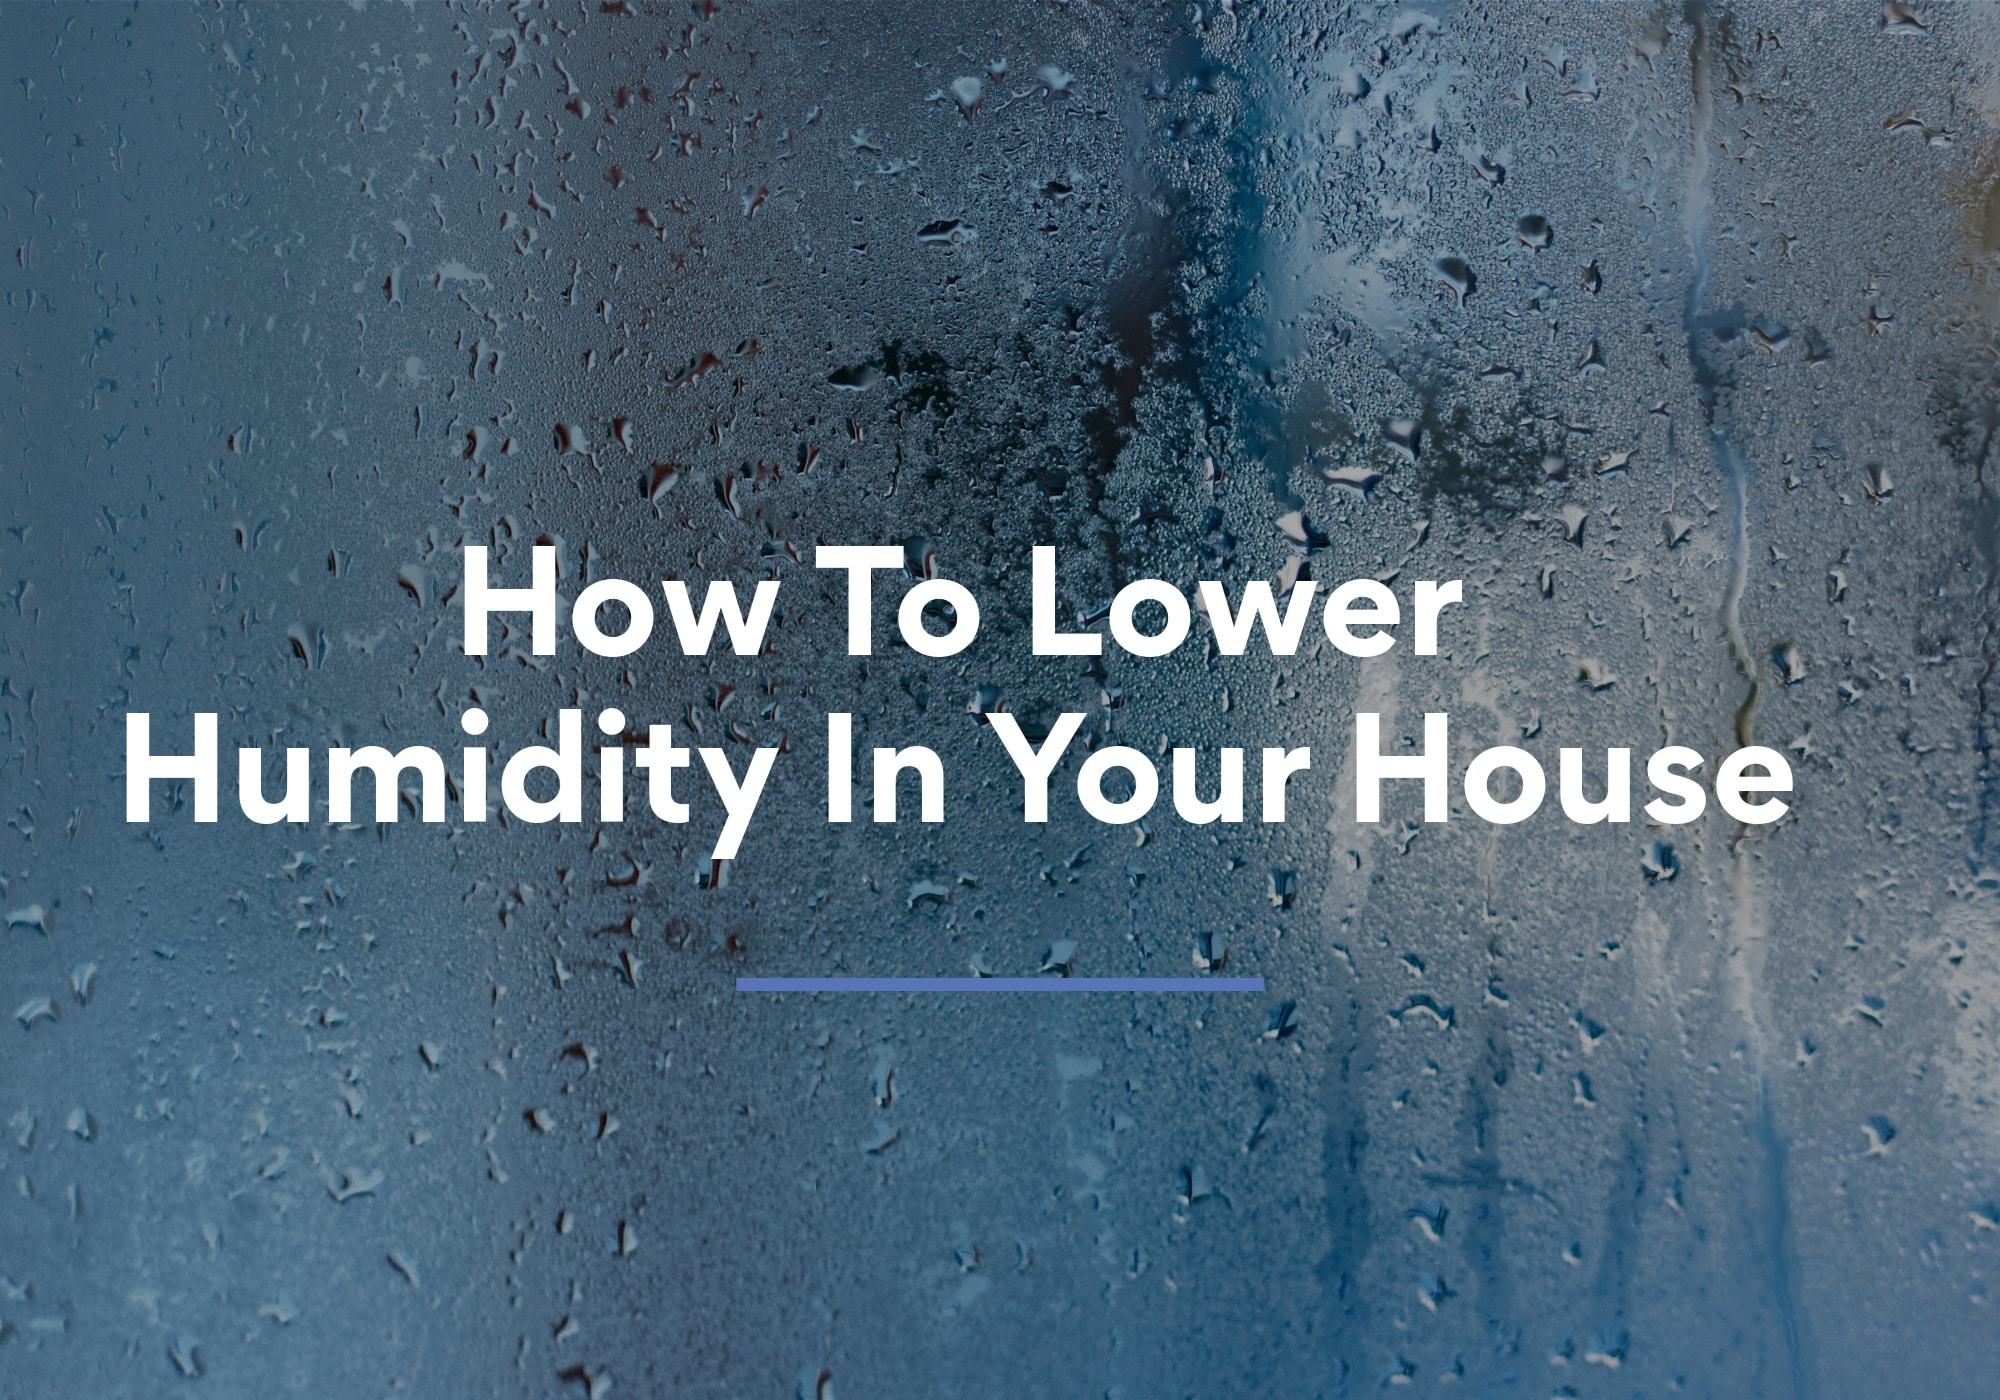 How To Lower Humidity In Your House